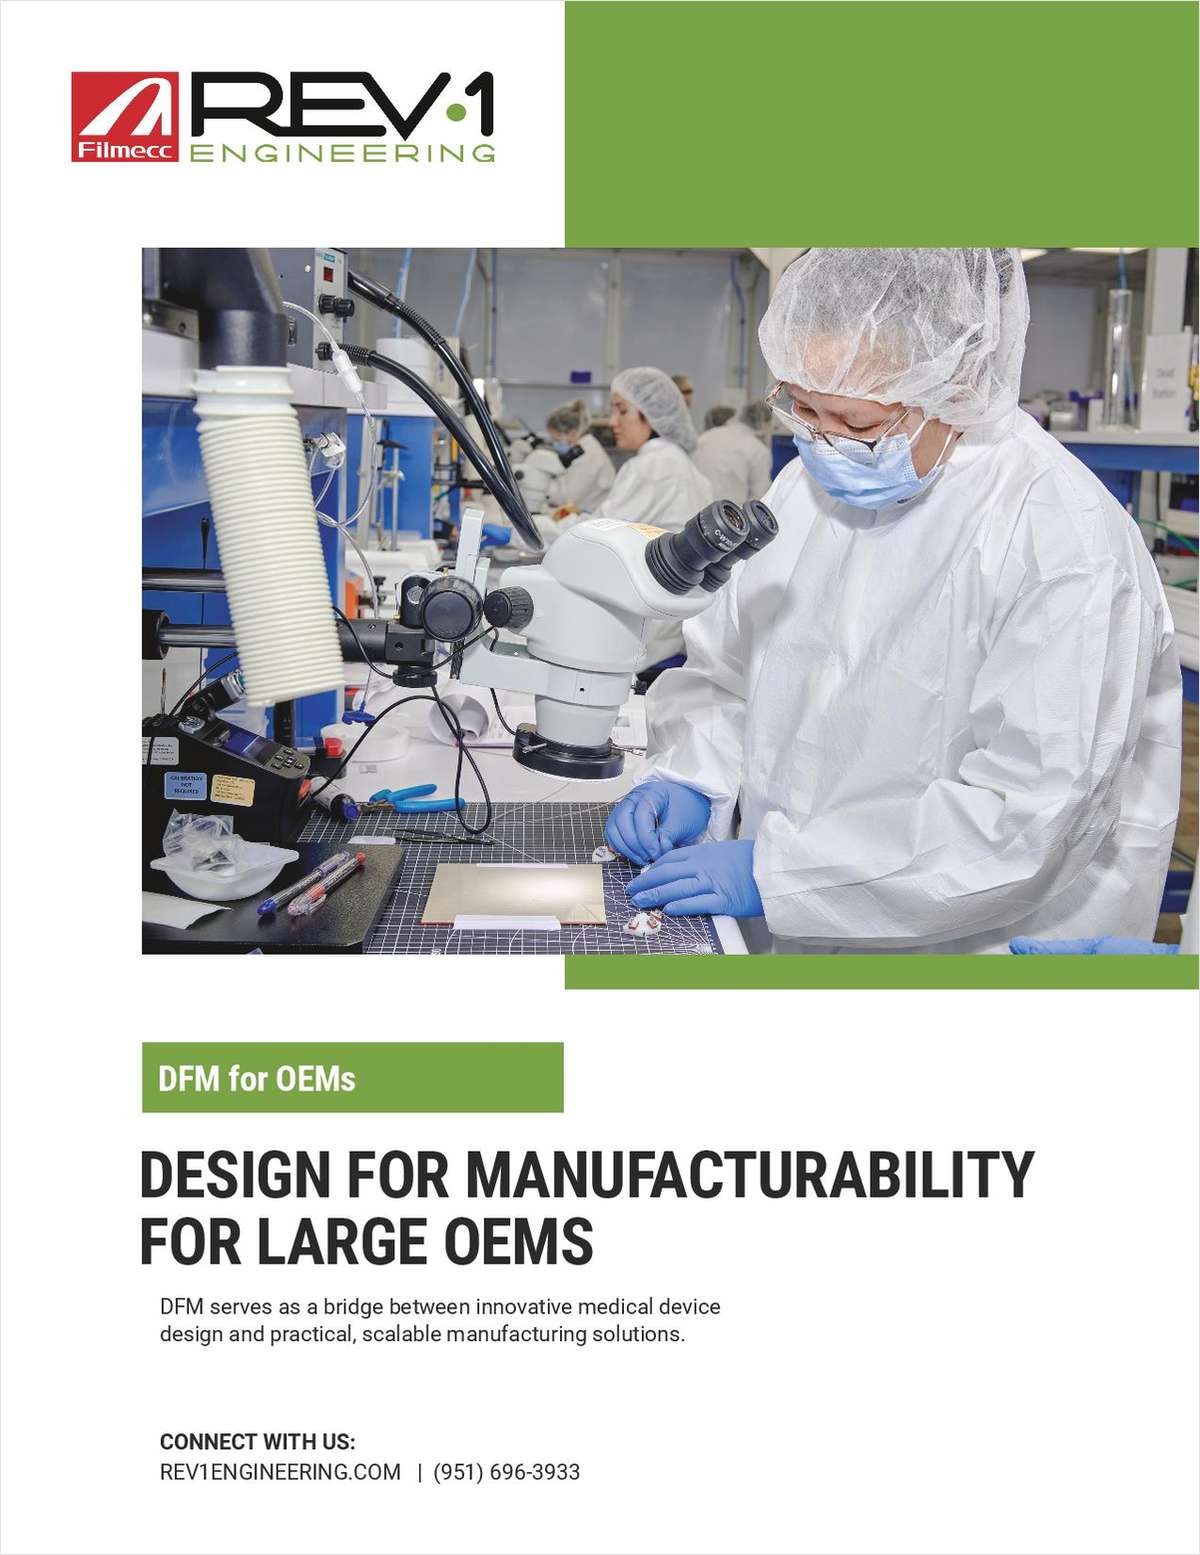 Design for manufacturability for large OEMs